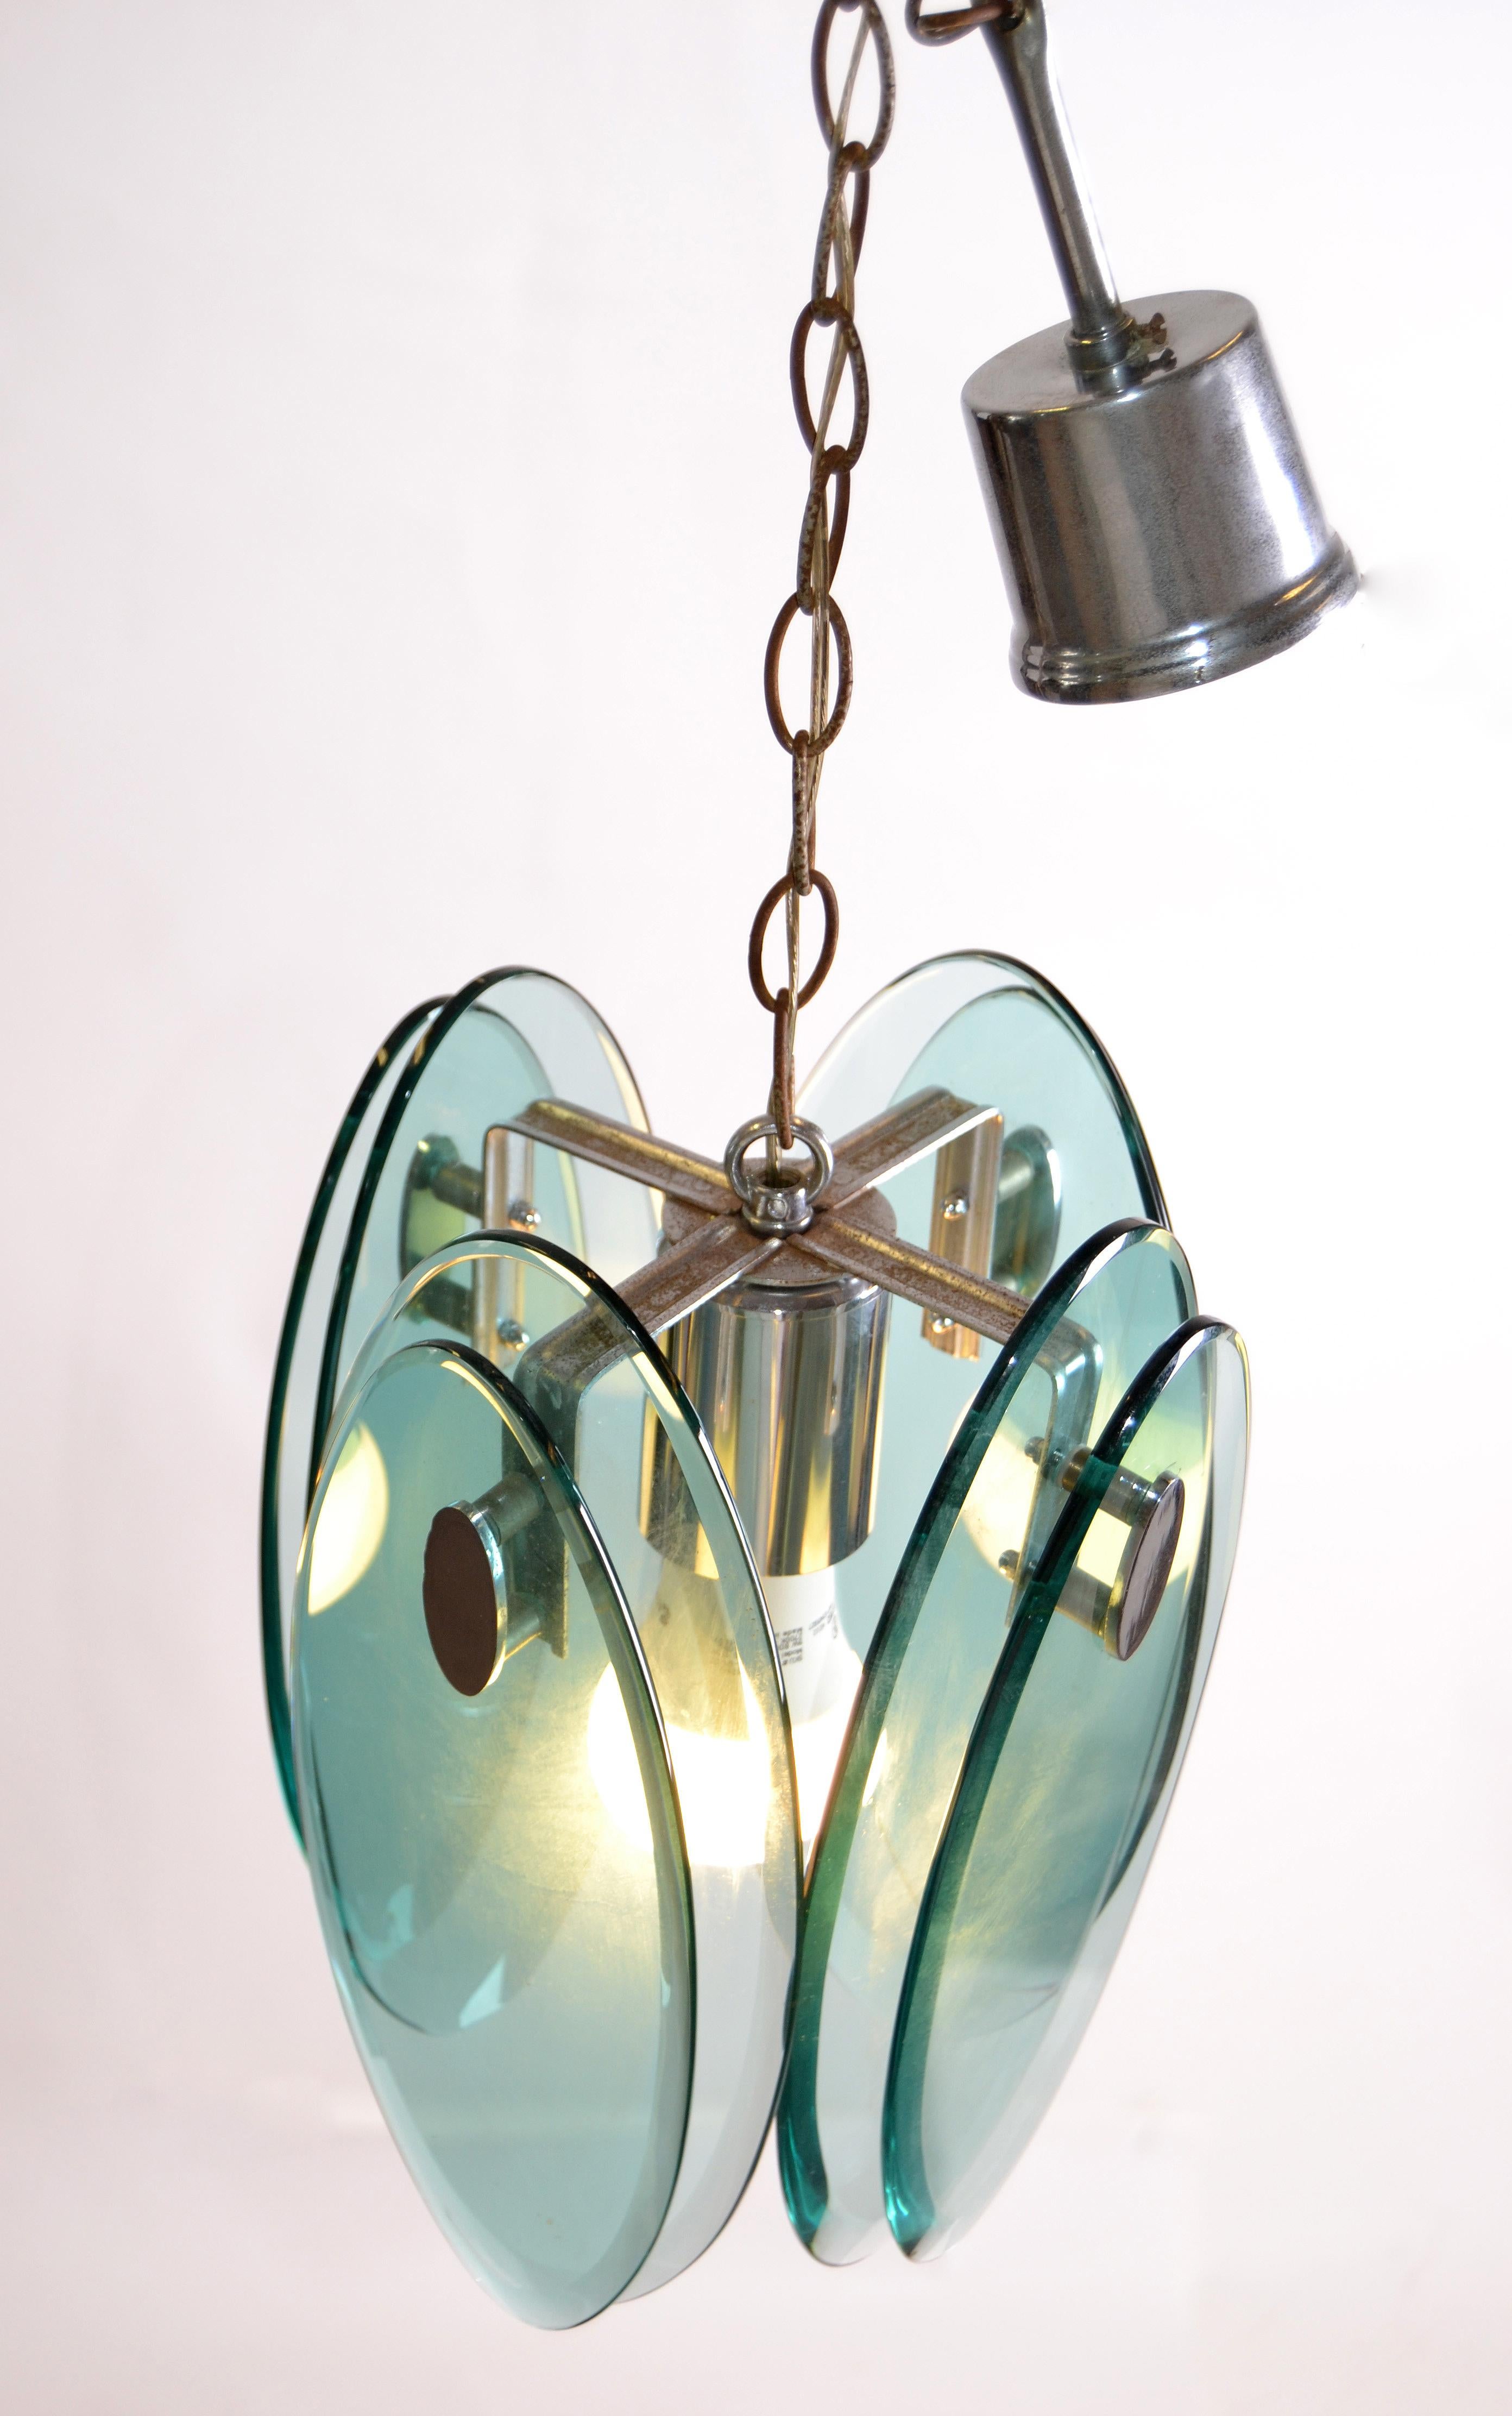 Fontana Arte Mid-Century Modern Beveled Glass and Chrome Pendant Light Fixture In Good Condition For Sale In Miami, FL